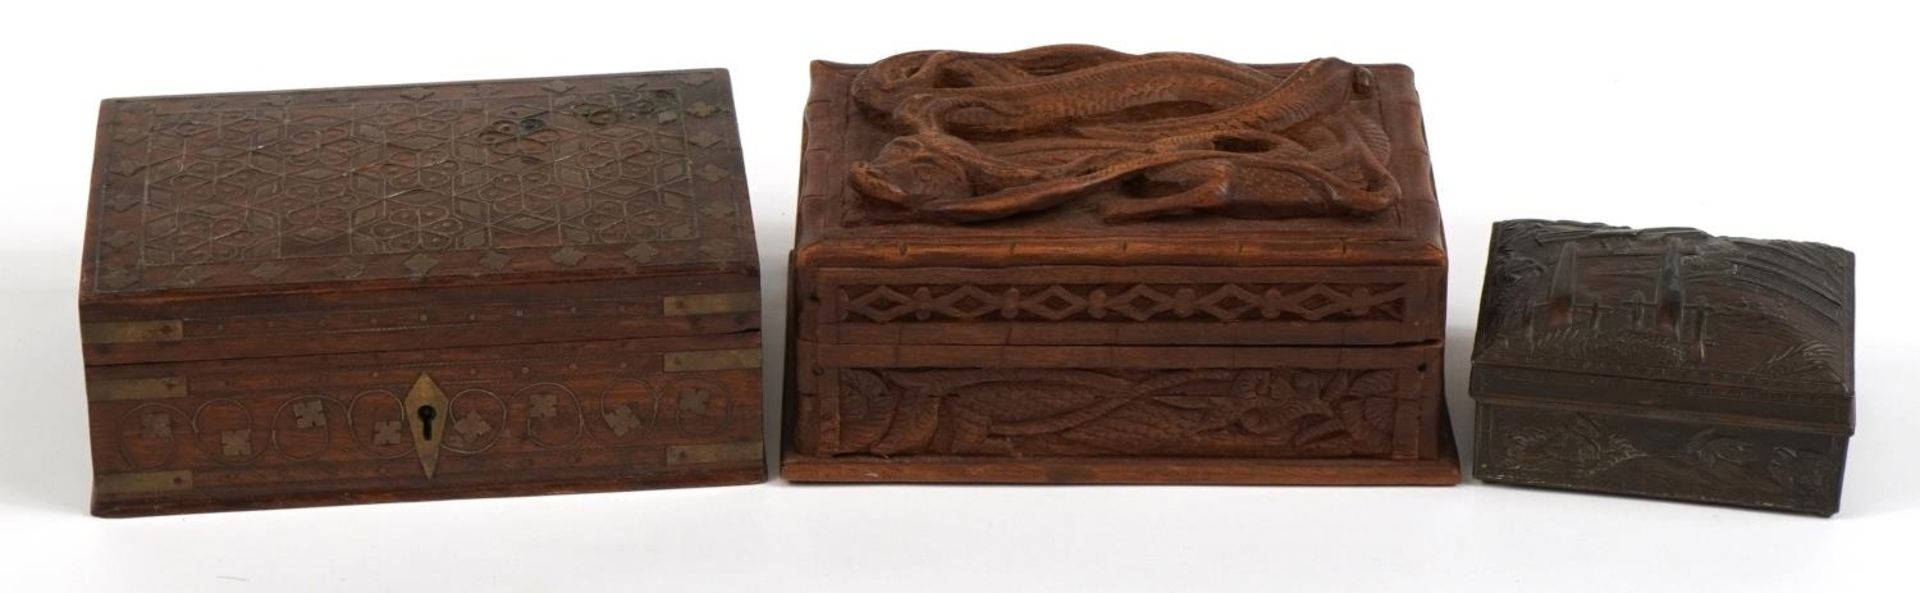 Three oriental and Indian boxes including a hardwood example deeply carved with a dragon and a